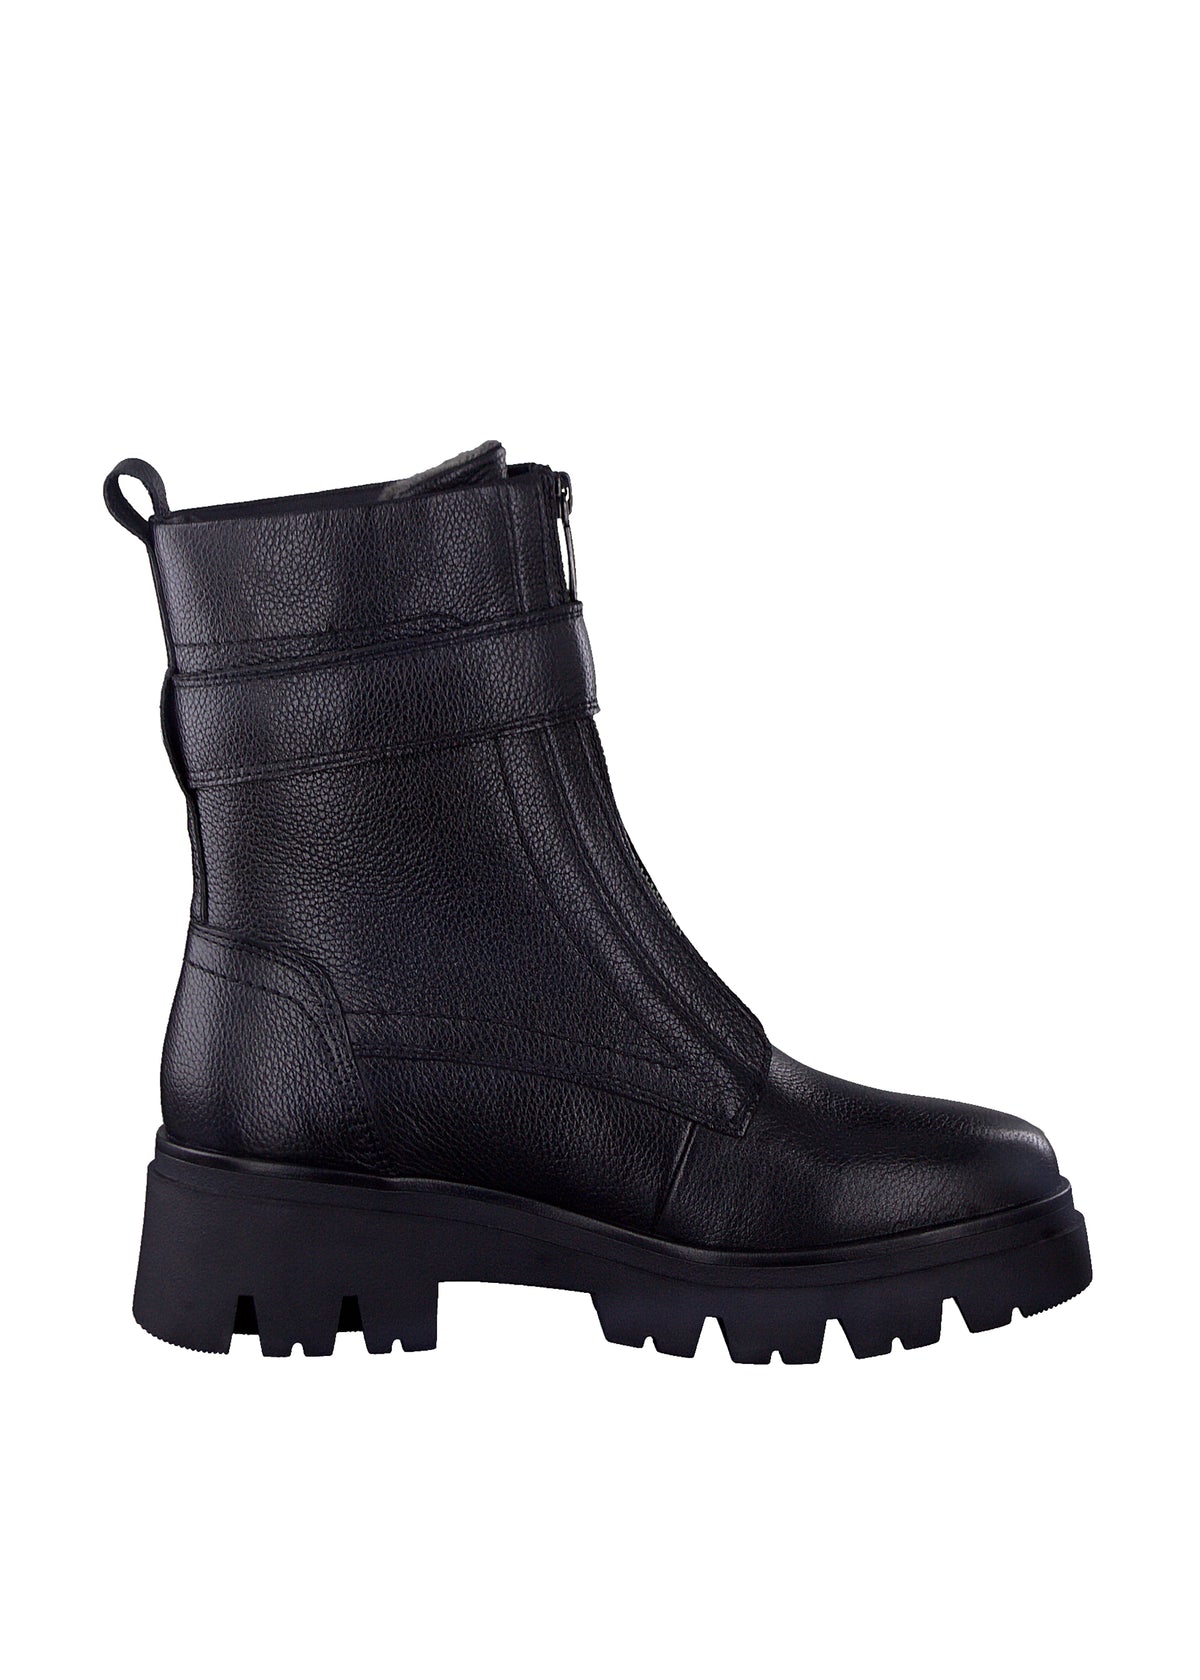 Ankle boots with a thick sole - black